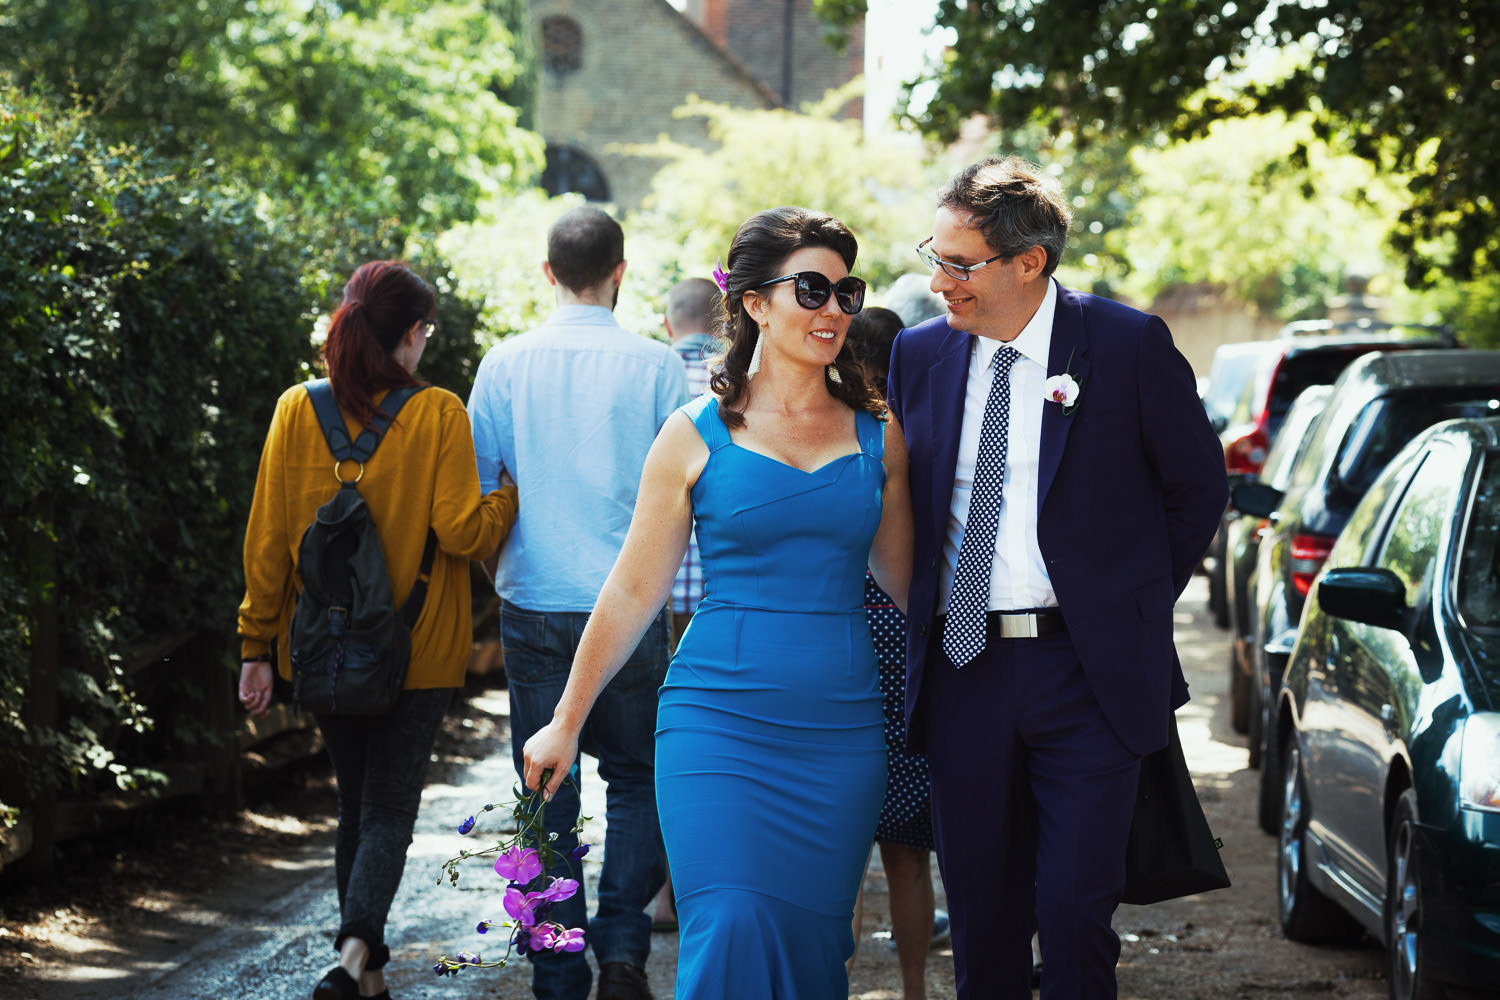 A couple on their wedding day walk to Petersham Nurseries for a wedding meal. The bride is wearing blue and the groom is in purple.